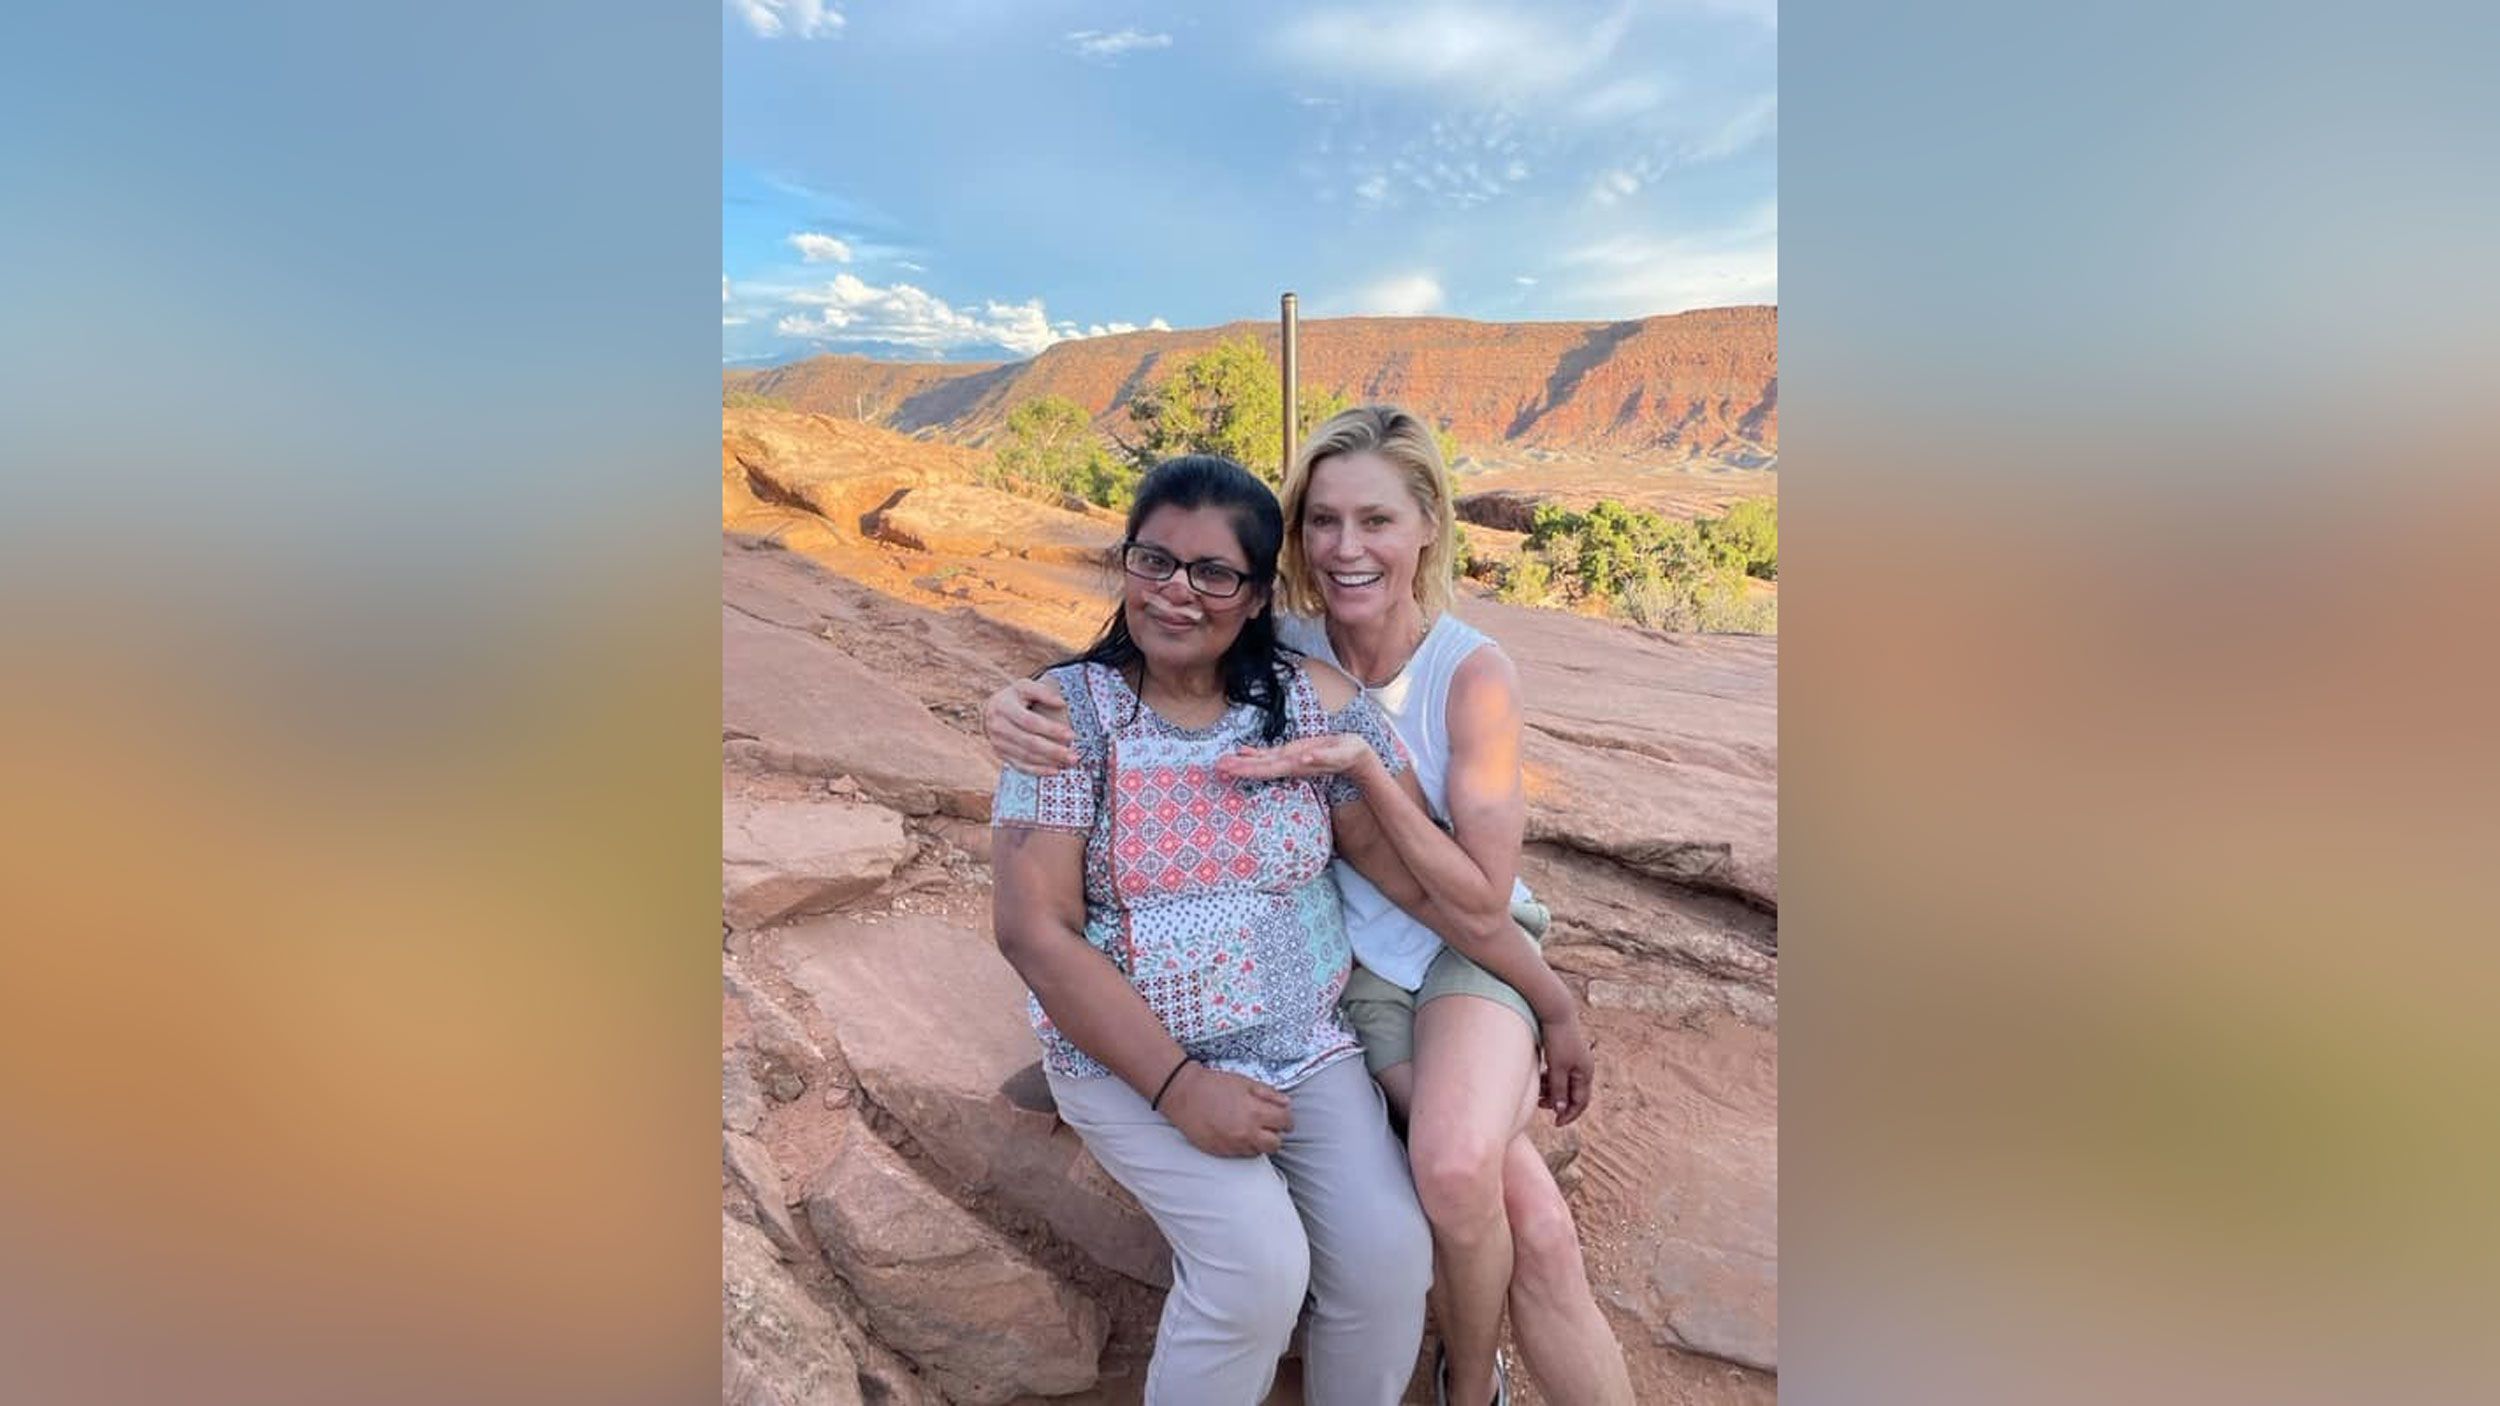 Hiker Saves Woman Who Fell While Hiking With One-Armed Daughter